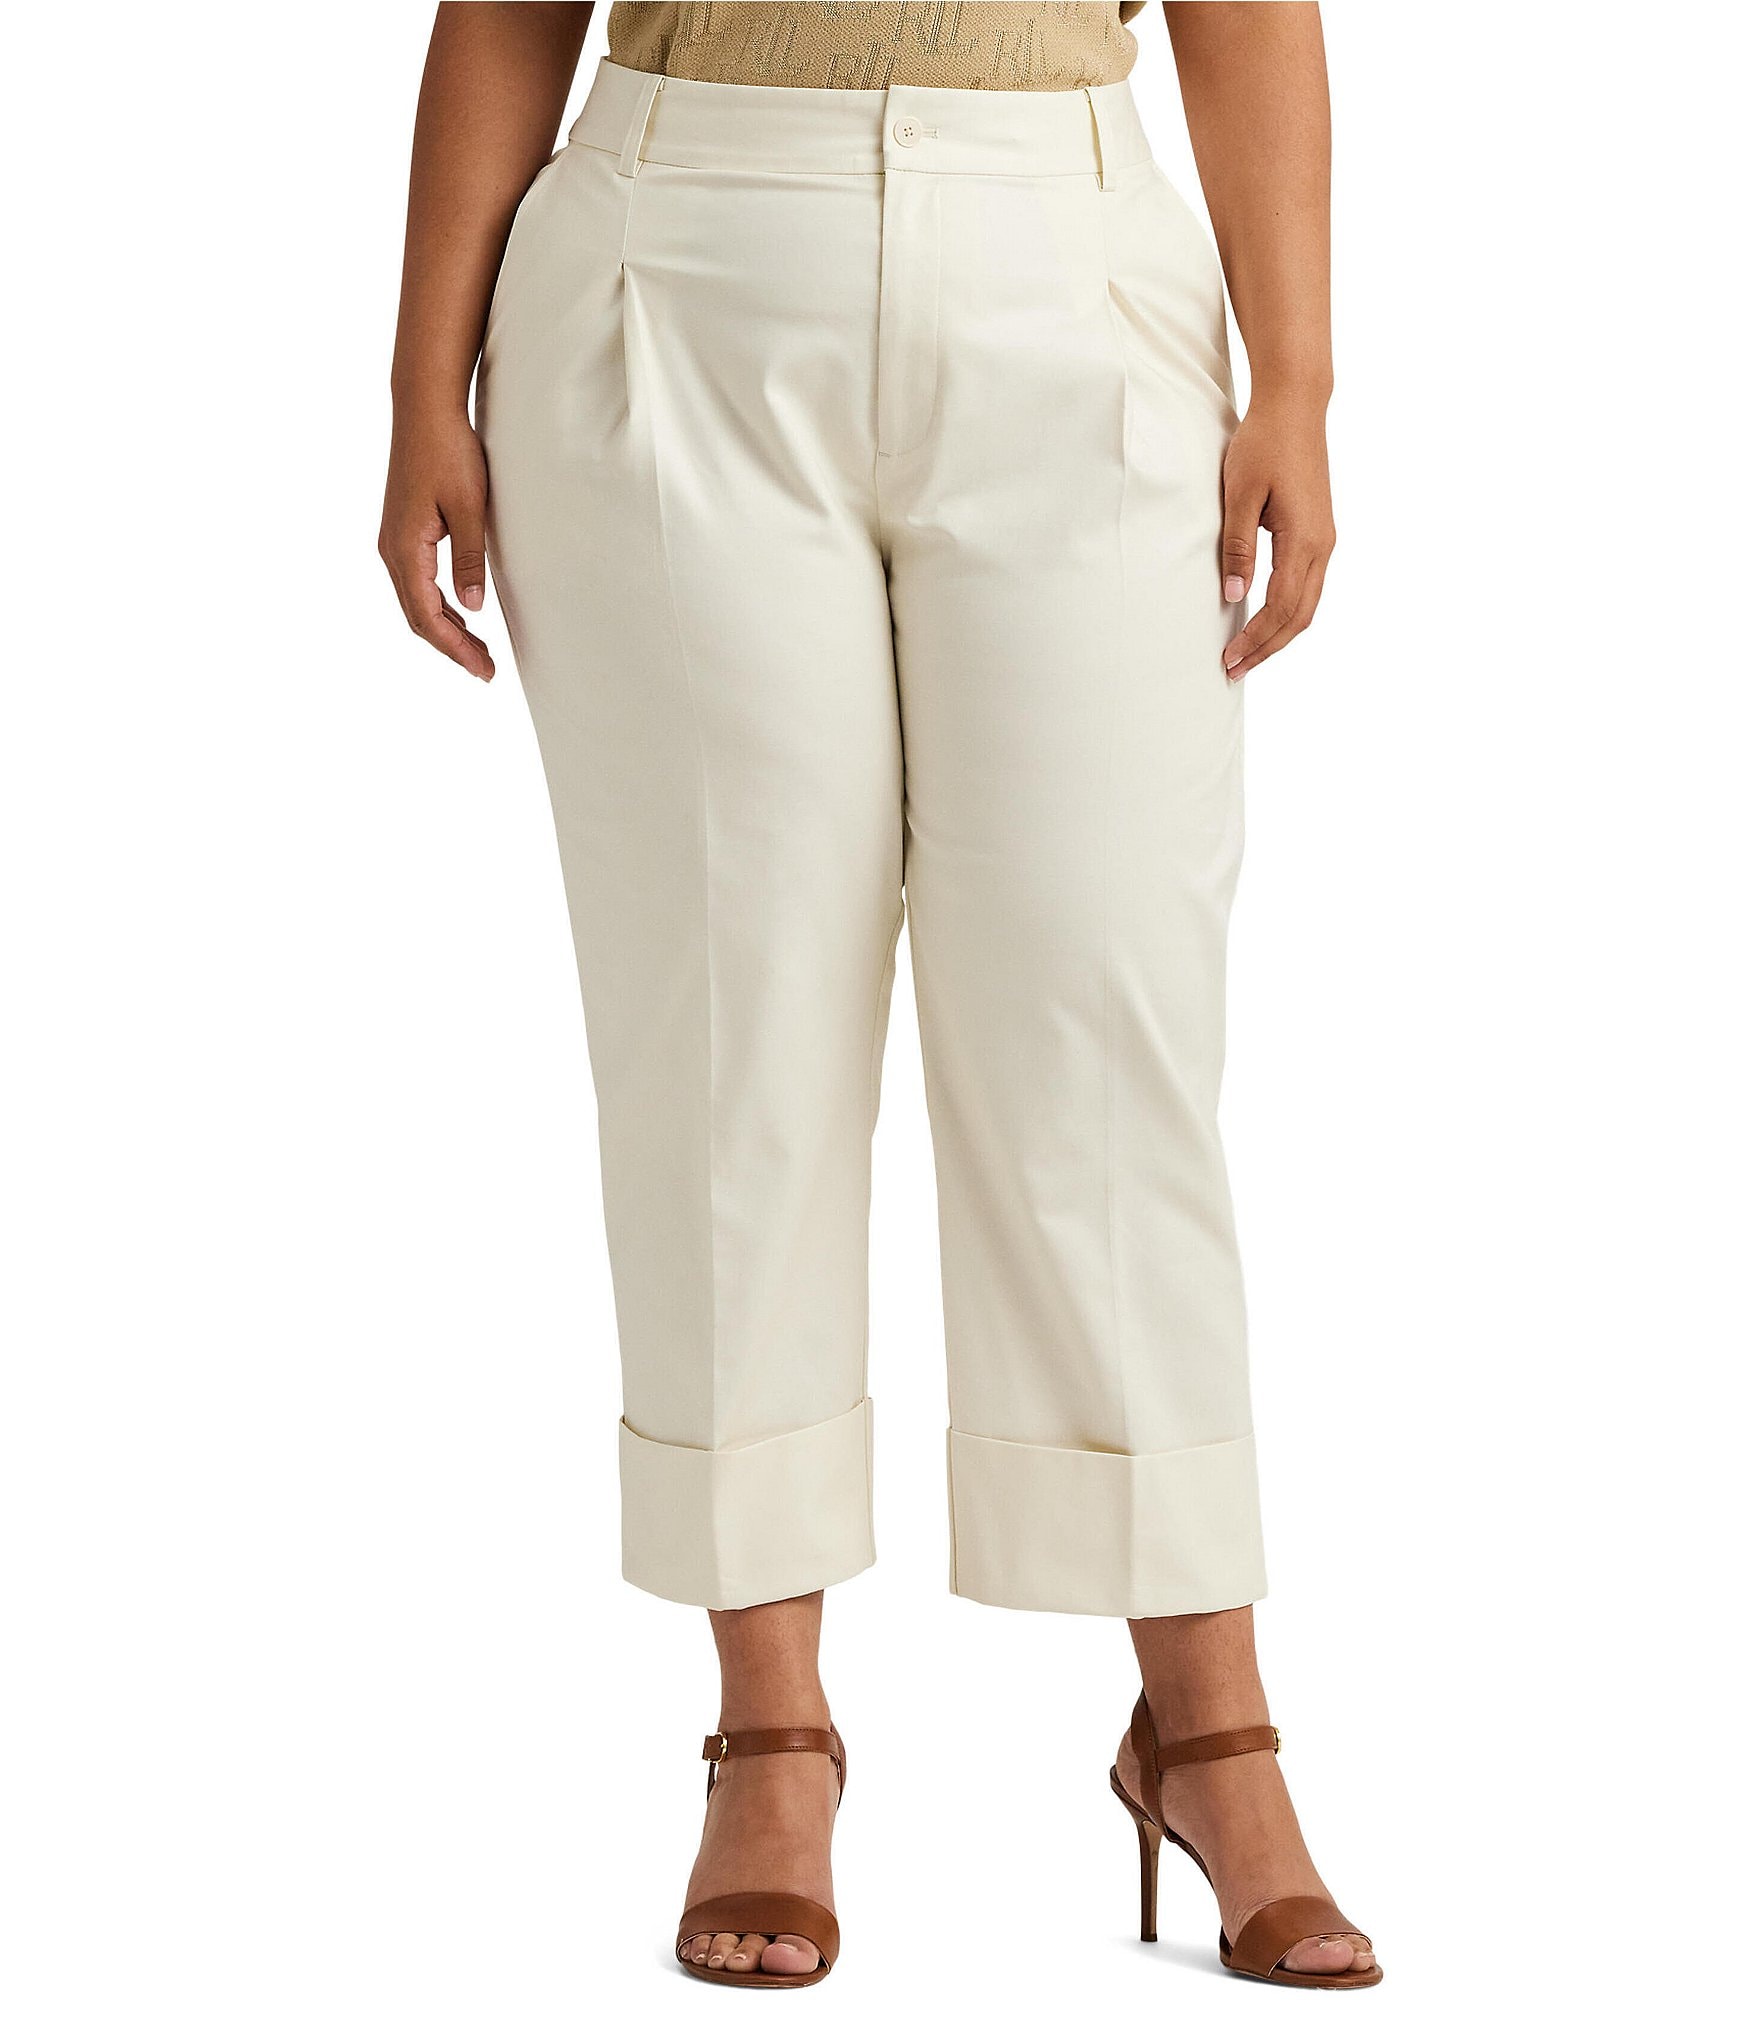 pleated pants: Women's Plus Size Clothing